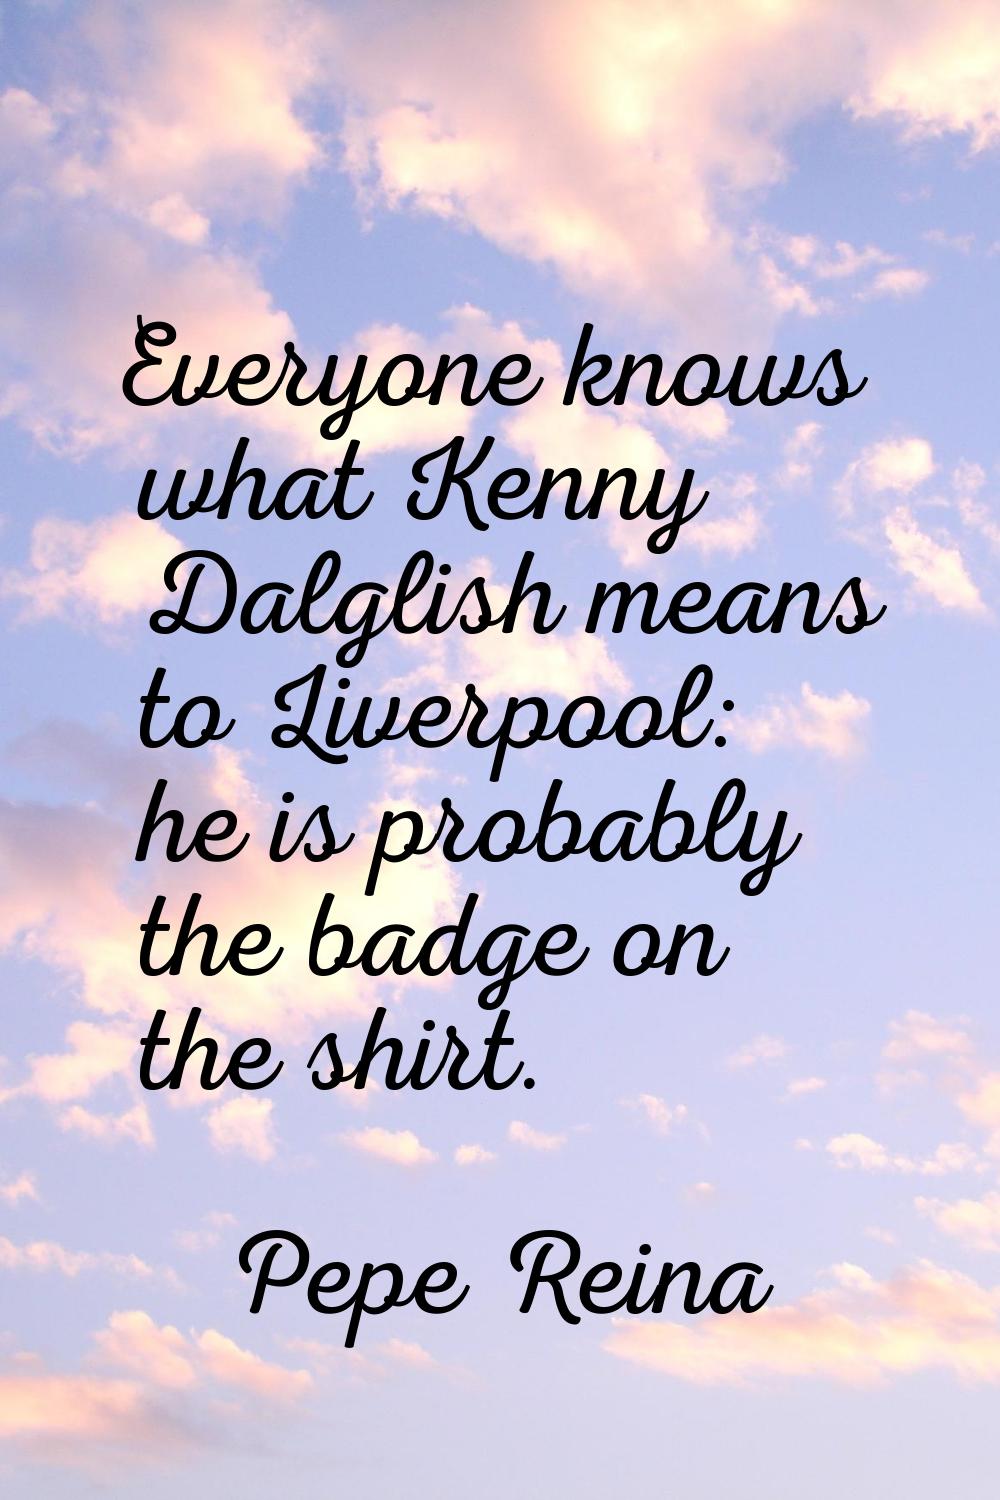 Everyone knows what Kenny Dalglish means to Liverpool: he is probably the badge on the shirt.